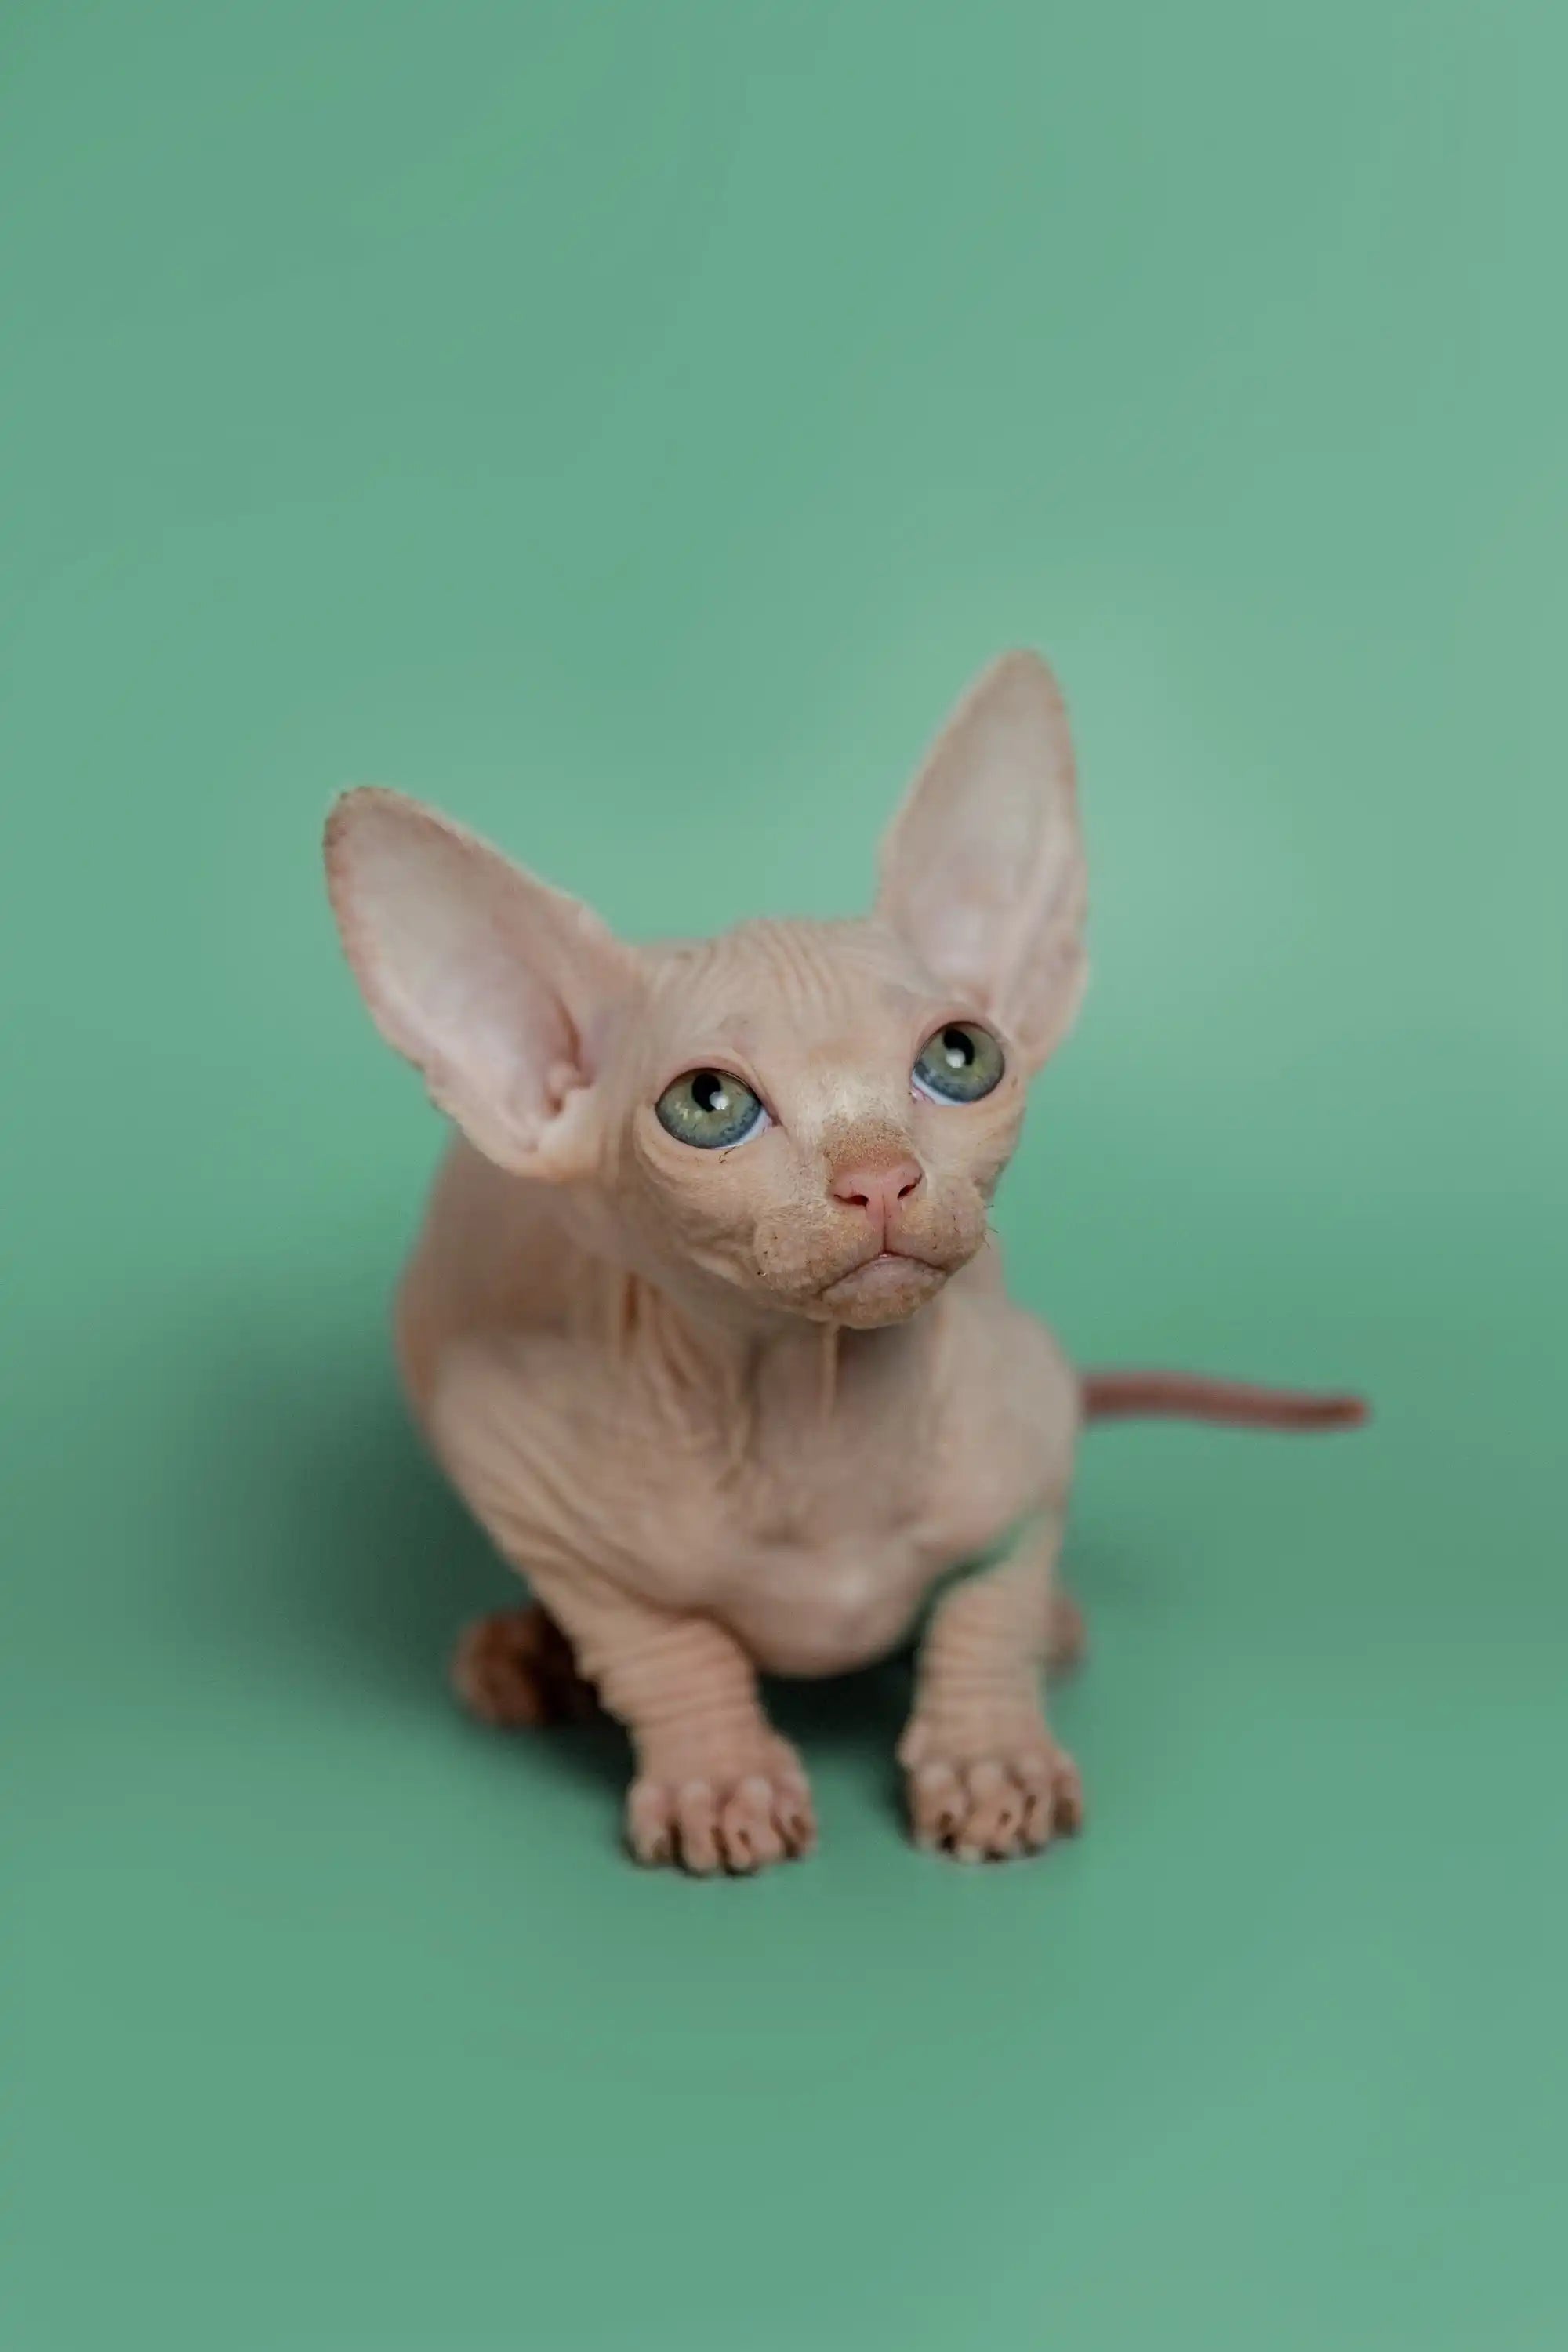 Sphynx Cats and Kittens for Sale Star | Kitten